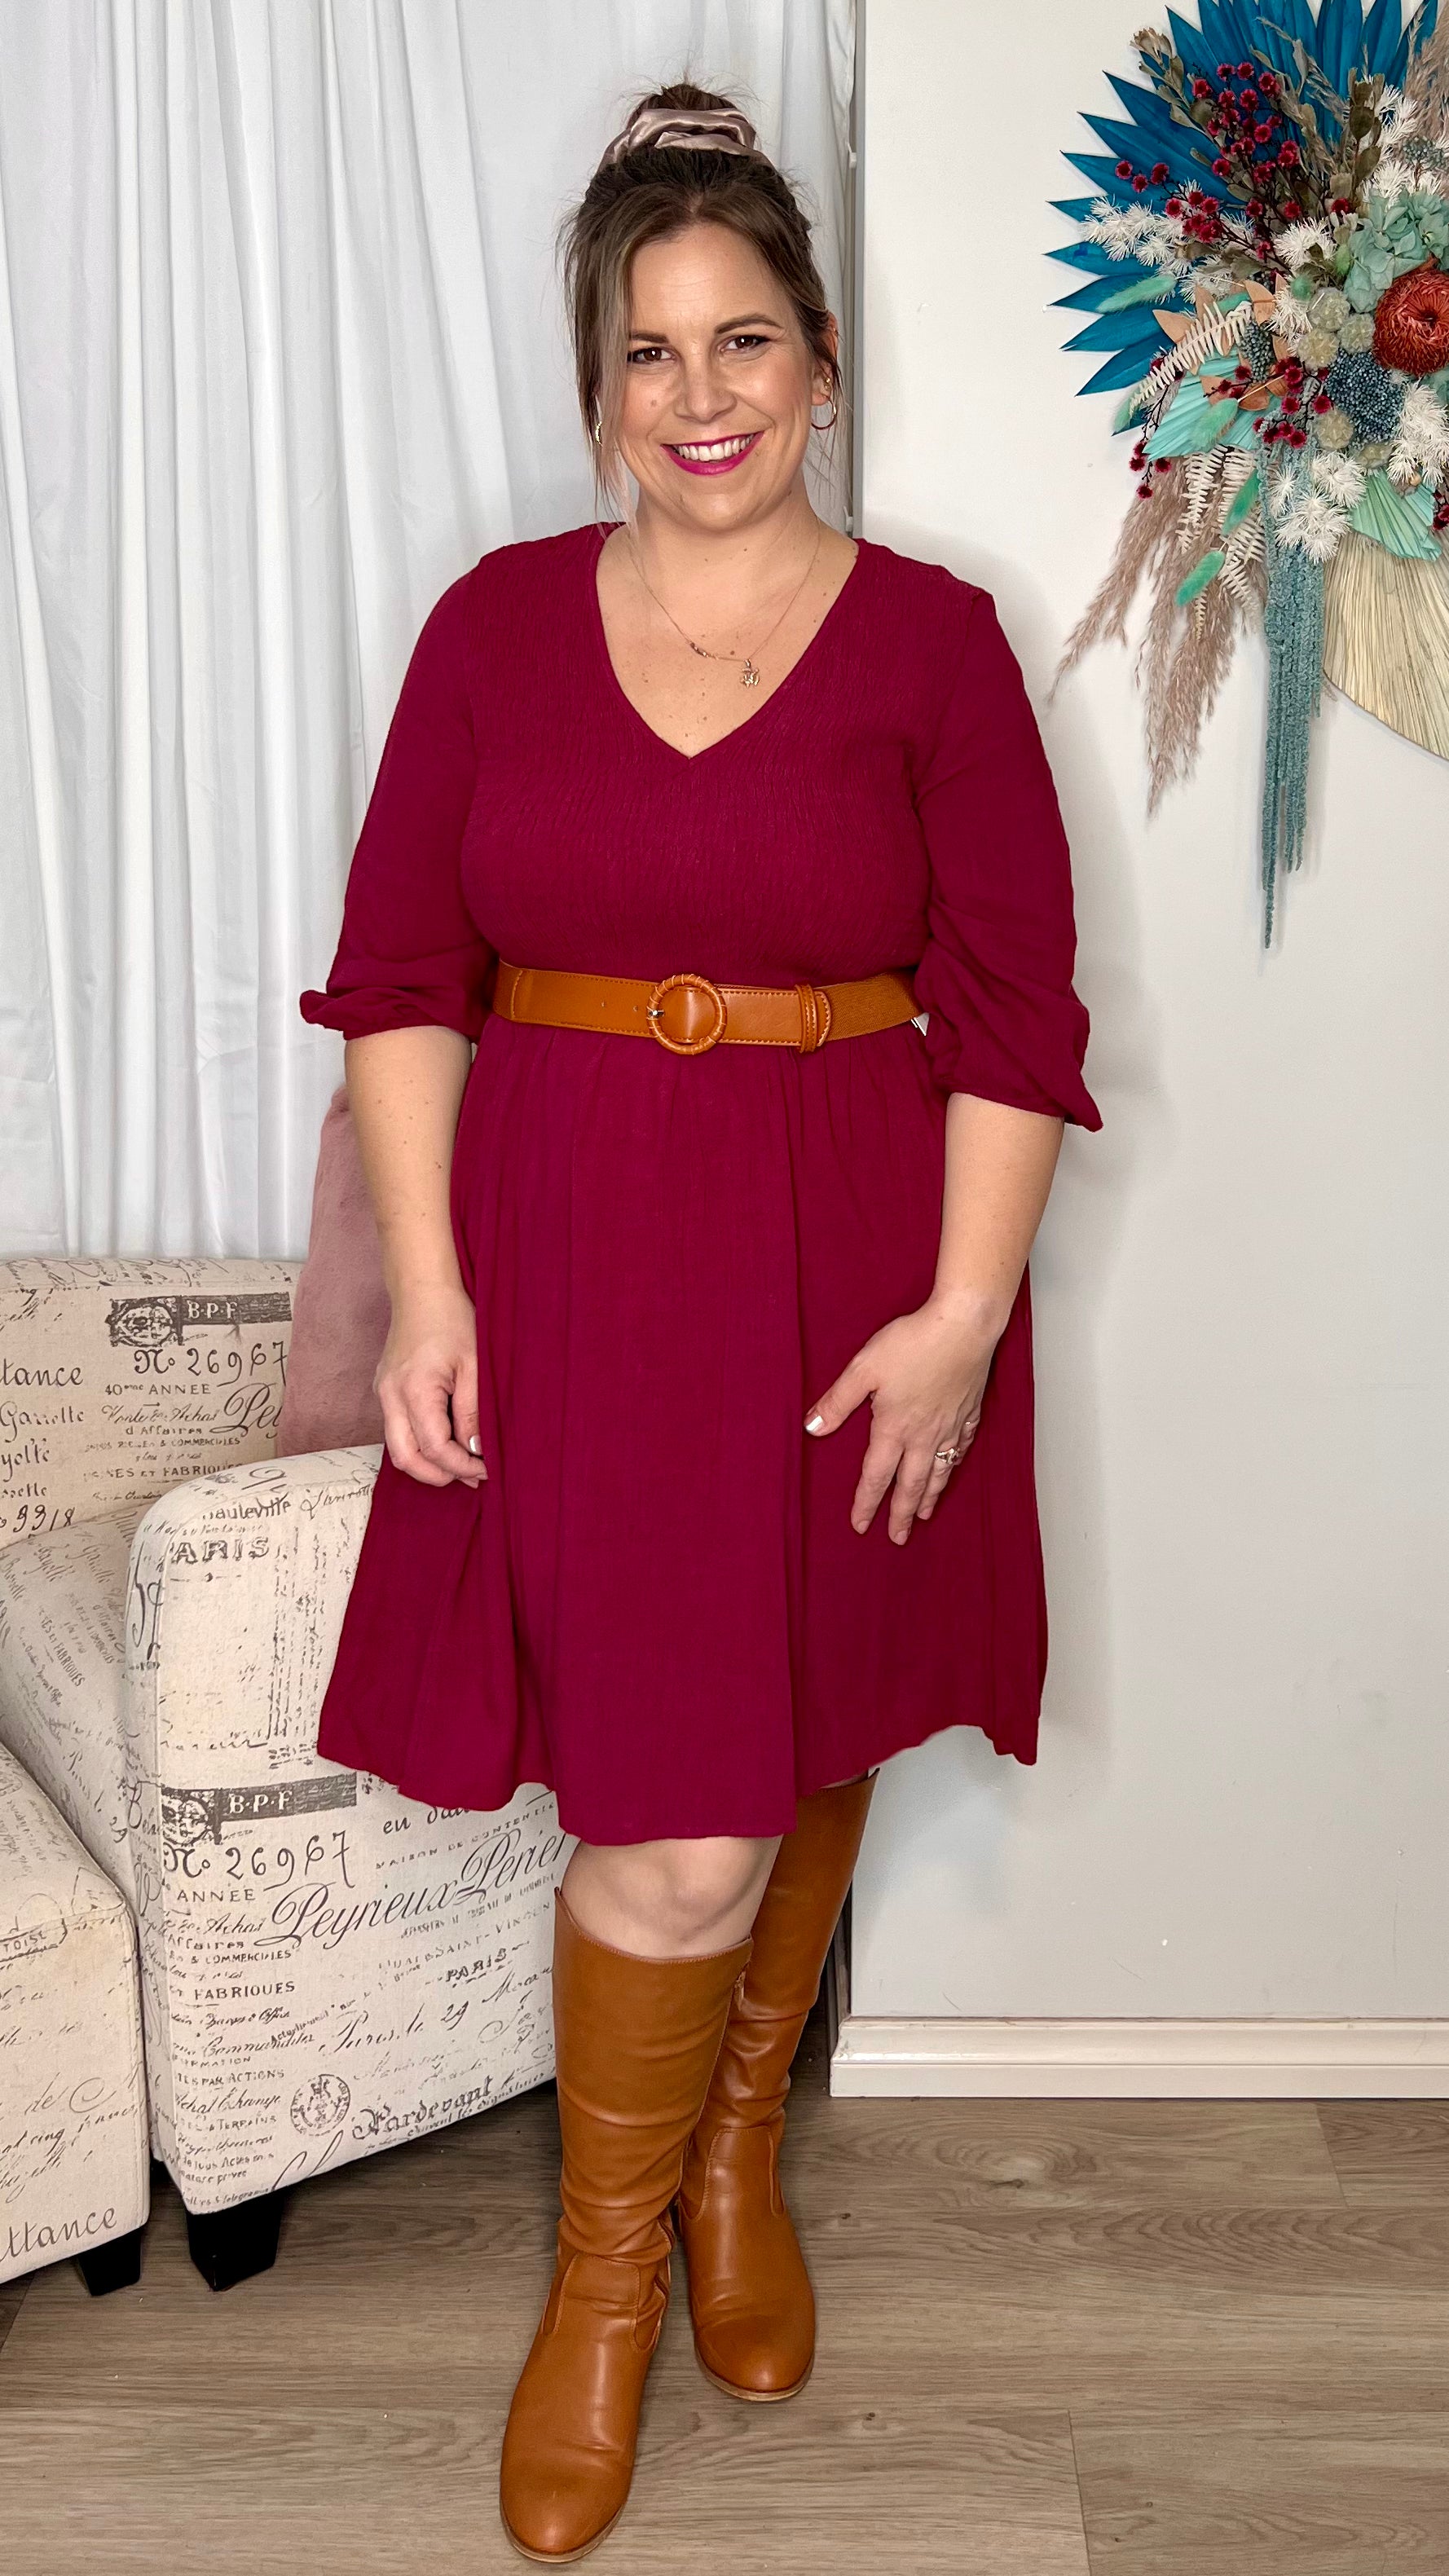 Darcy Rouched Shift Dress: The Darcy Rouched Shift Dress is a simple but stunning design that can be dressed up or down. It is a super comfy chuck on and go style with some gorgeous features t - Ciao Bella Dresses - Mylk the Label